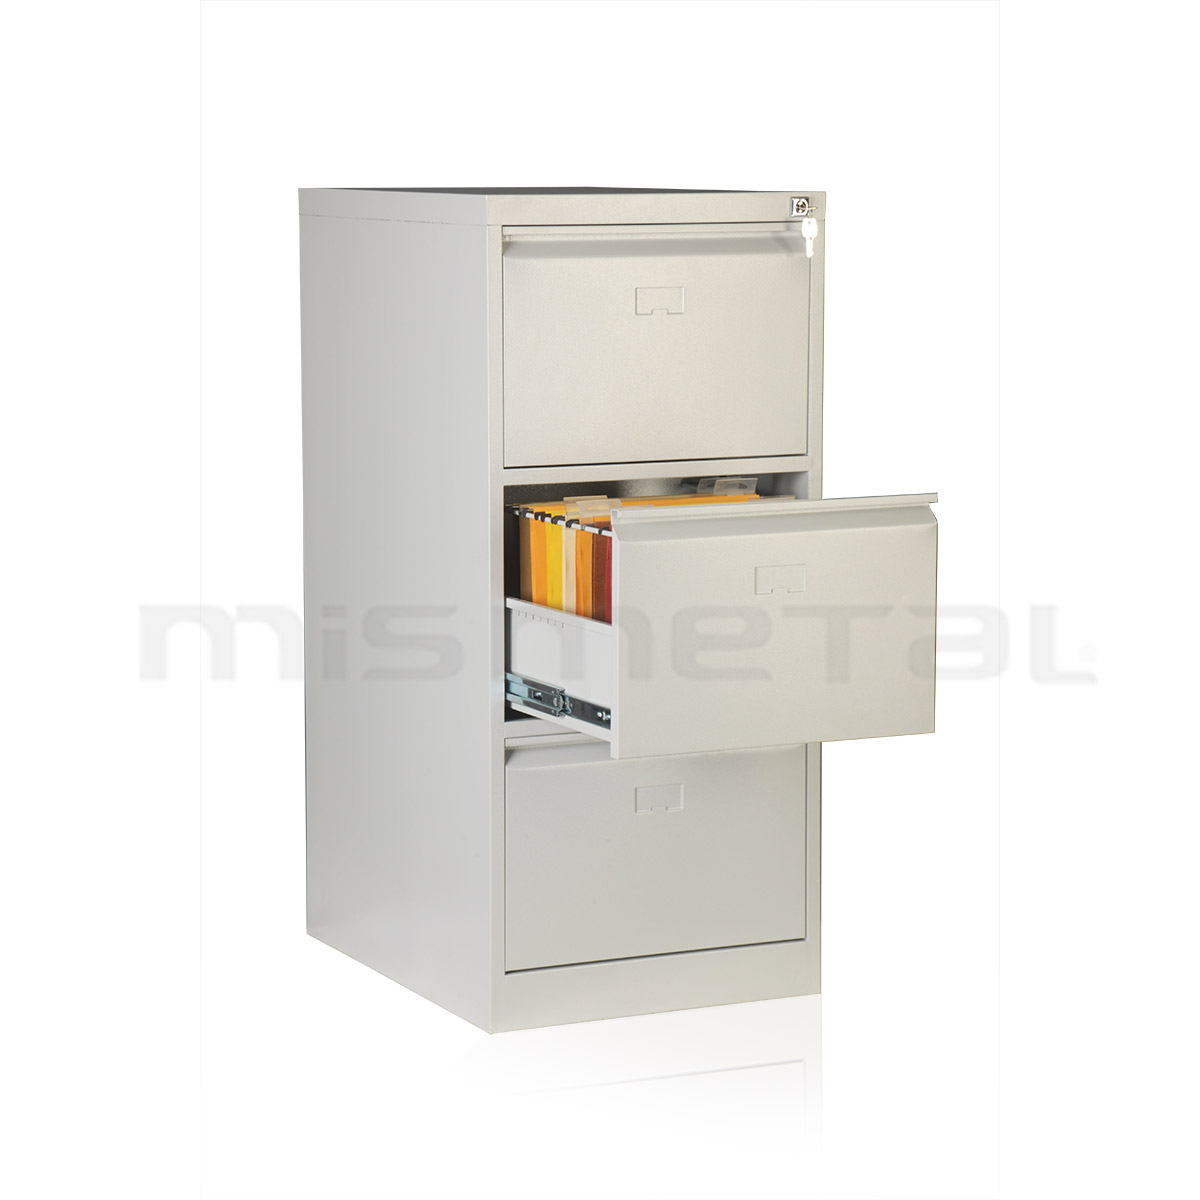 3 Drawers Telescopic Rail Card Index Cabinet